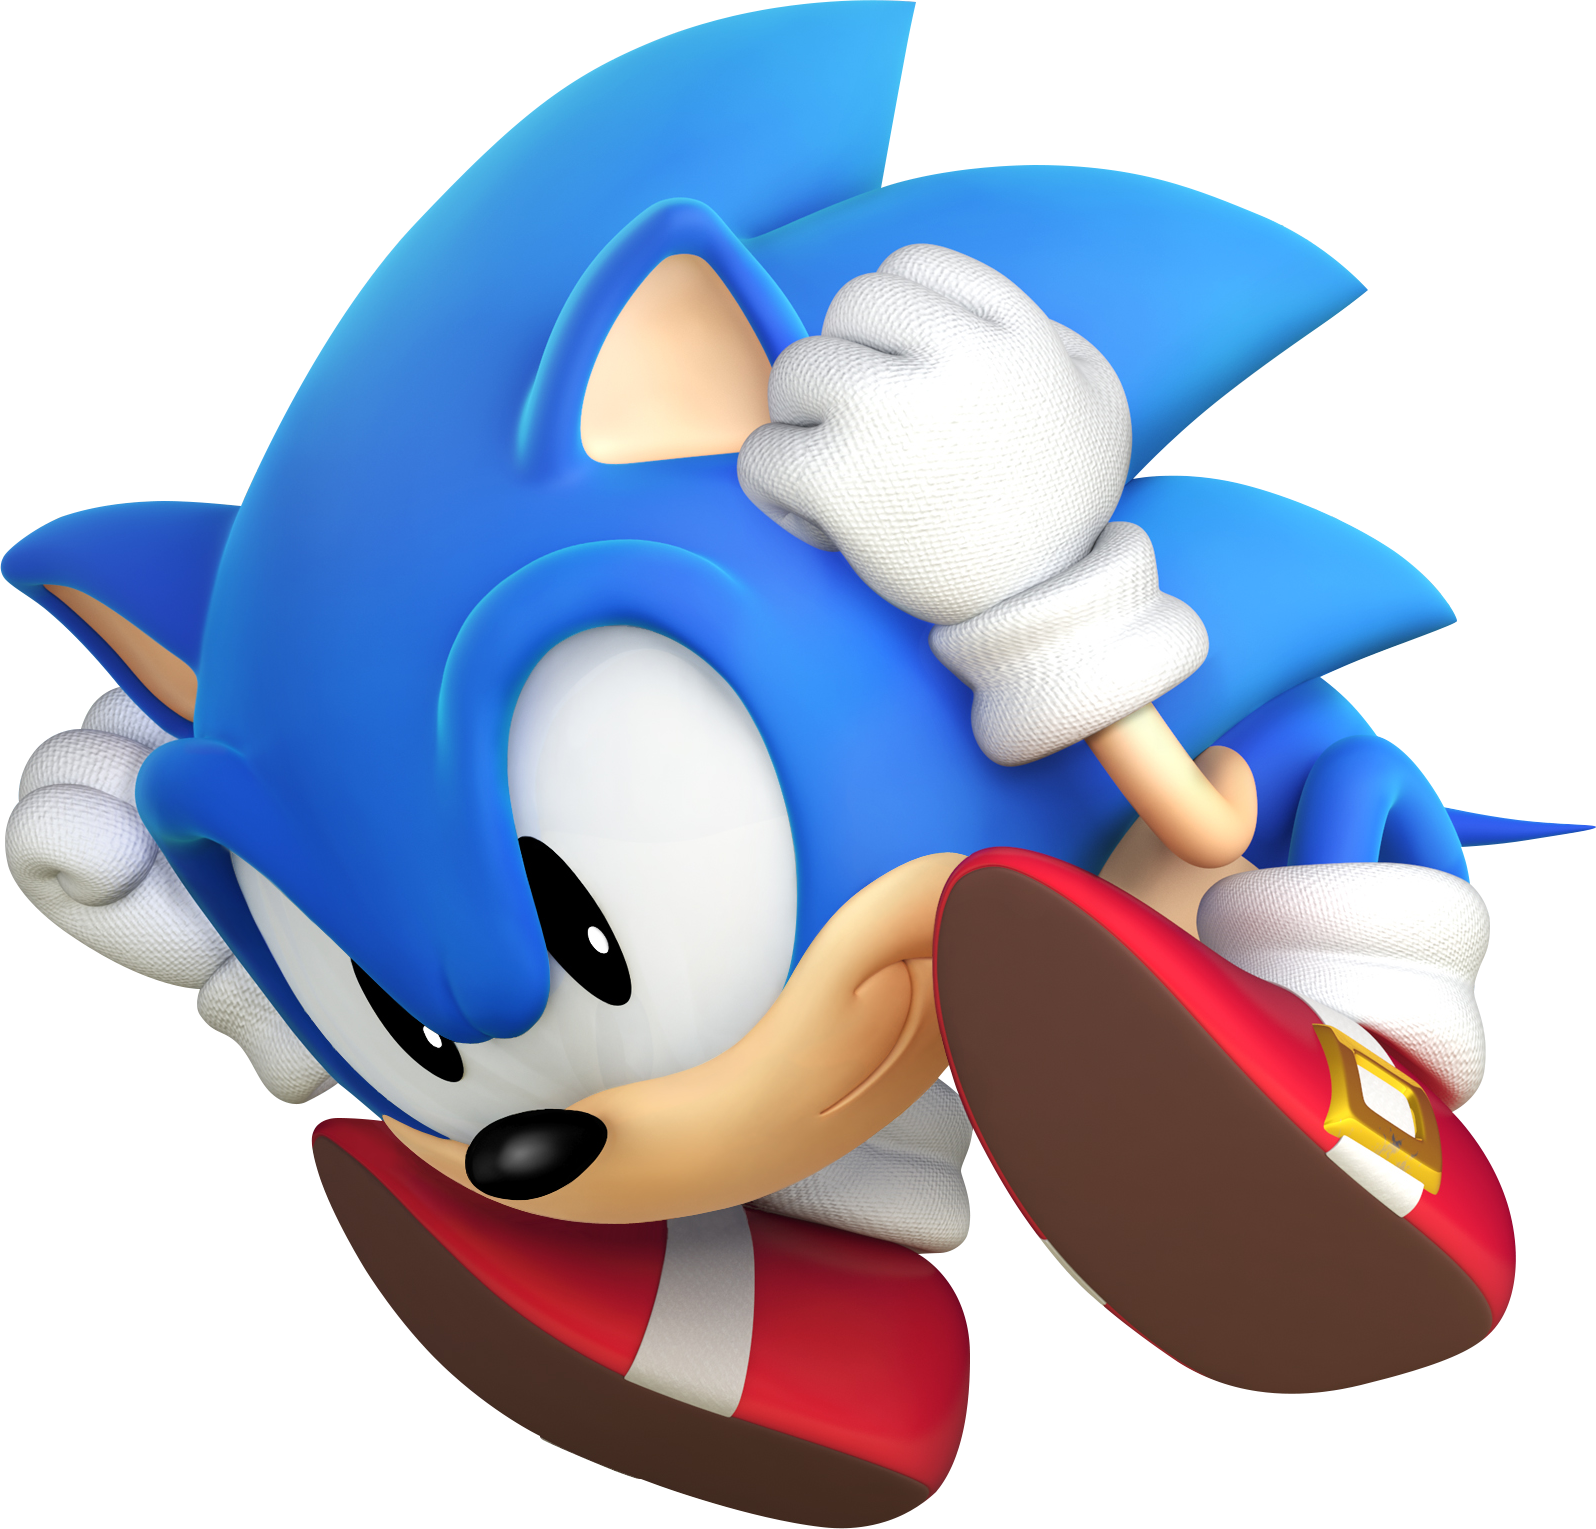 Spin Attack - Classic Sonic Spin Dash (1596x1529)